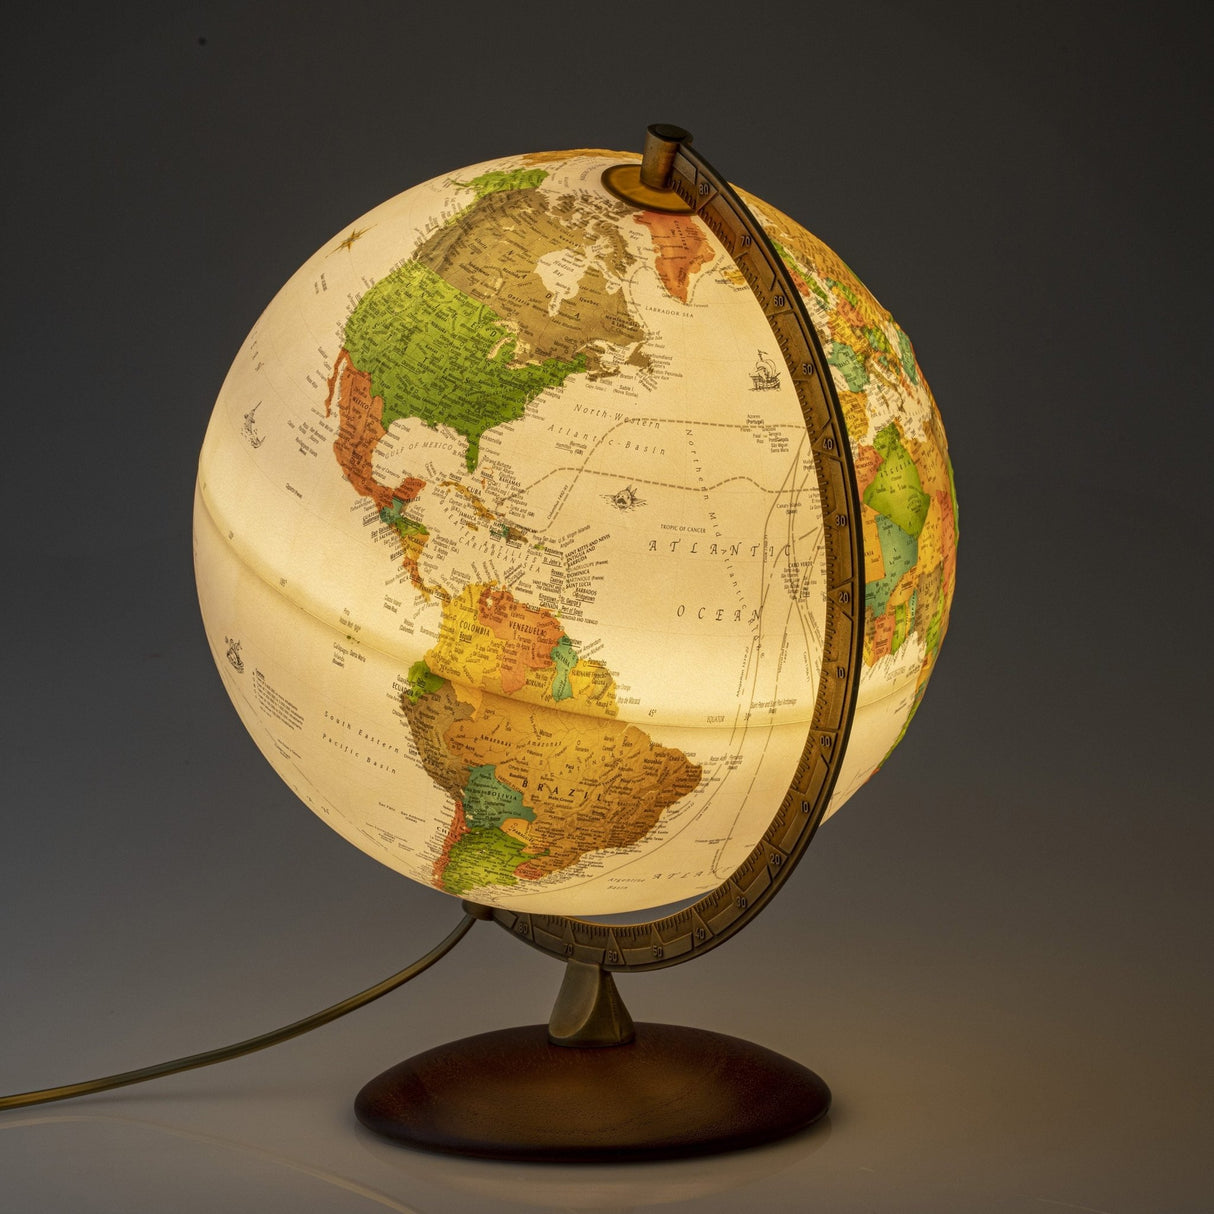 Athens Raised Relief Globe - WP21108 - Ultimate Globes